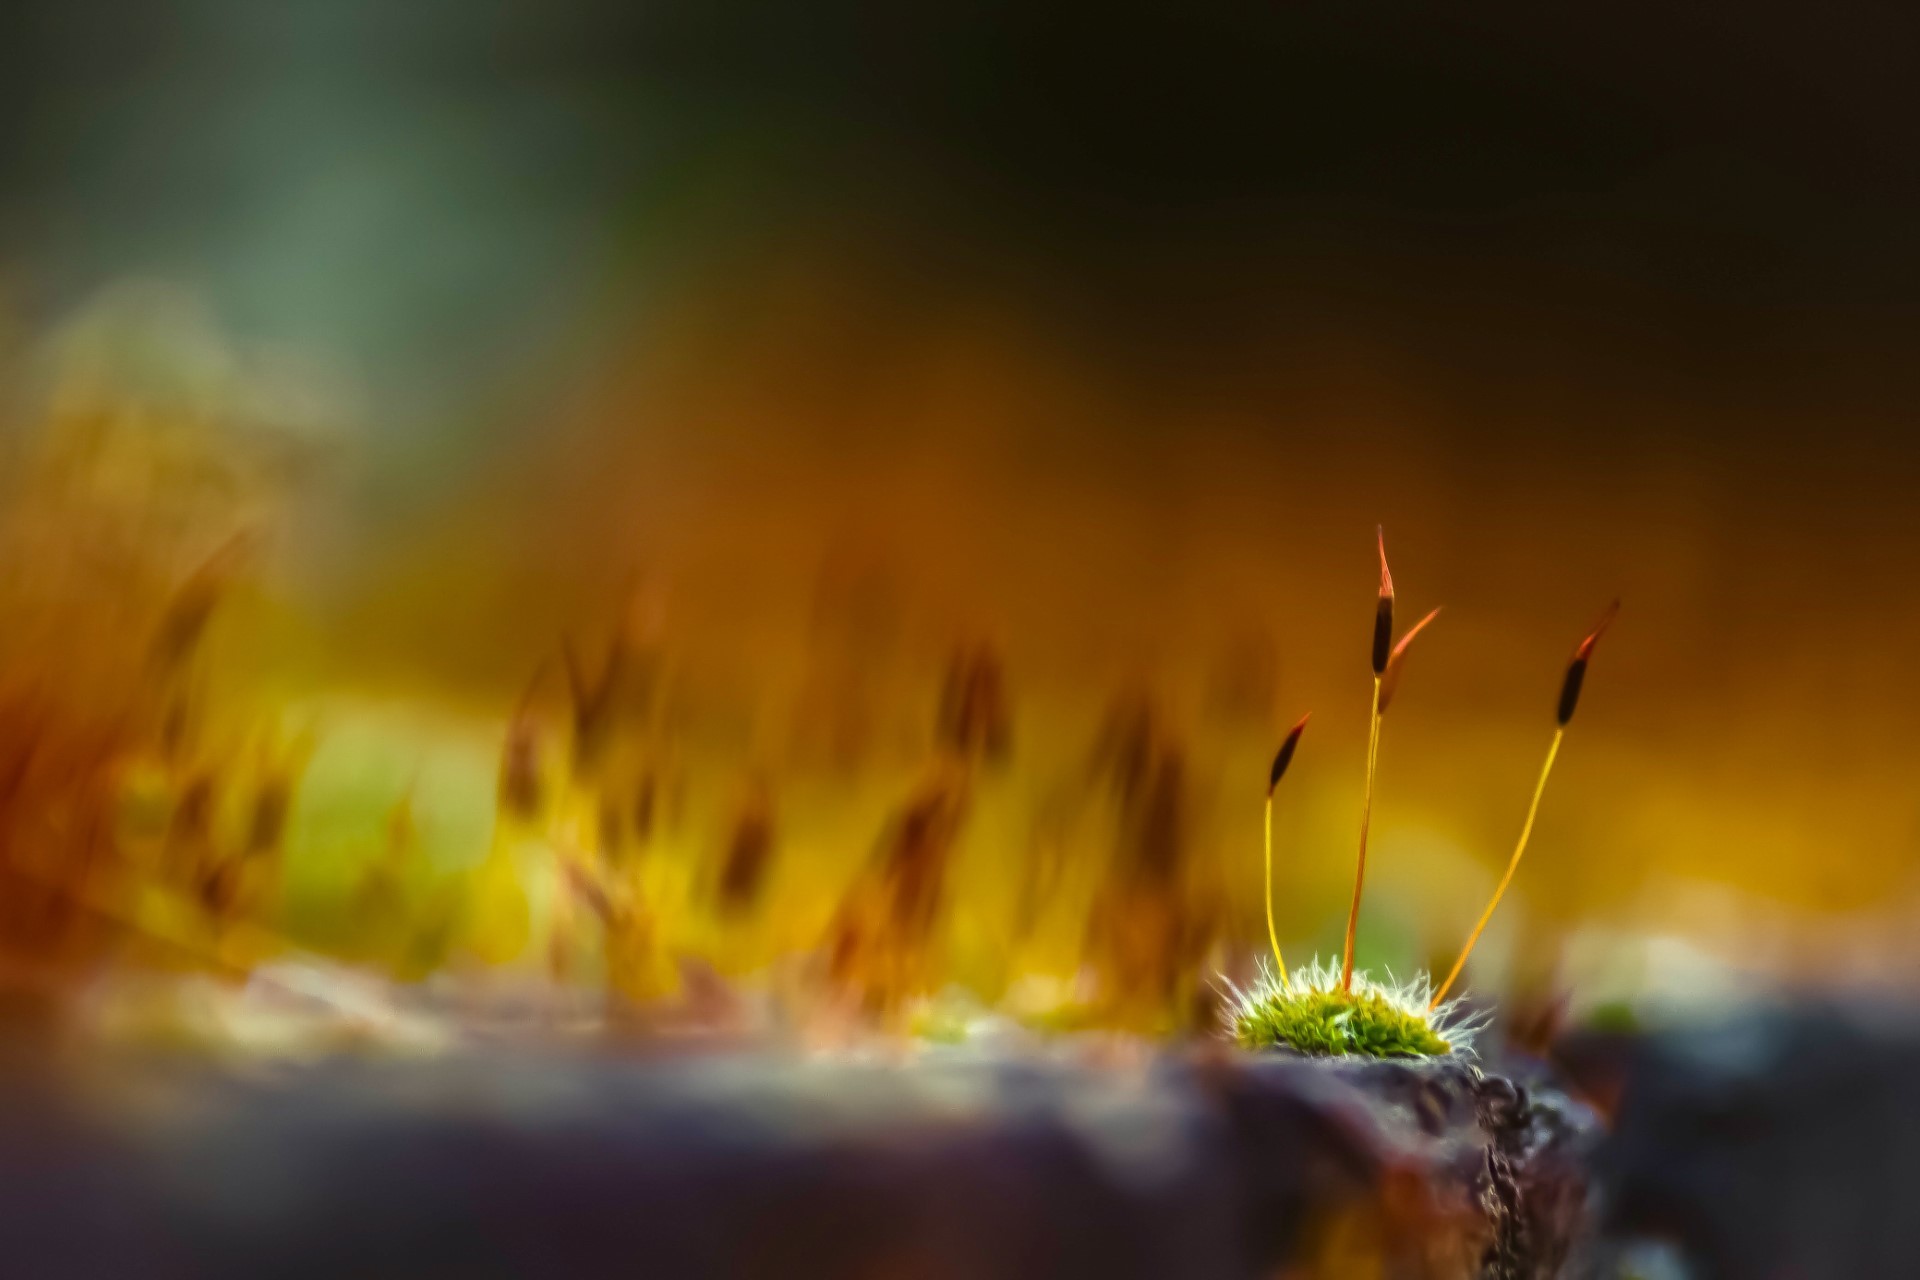 Moss in warm morning light - This years exhibition photo in Leeds and last year in Chicago and Philadelphia